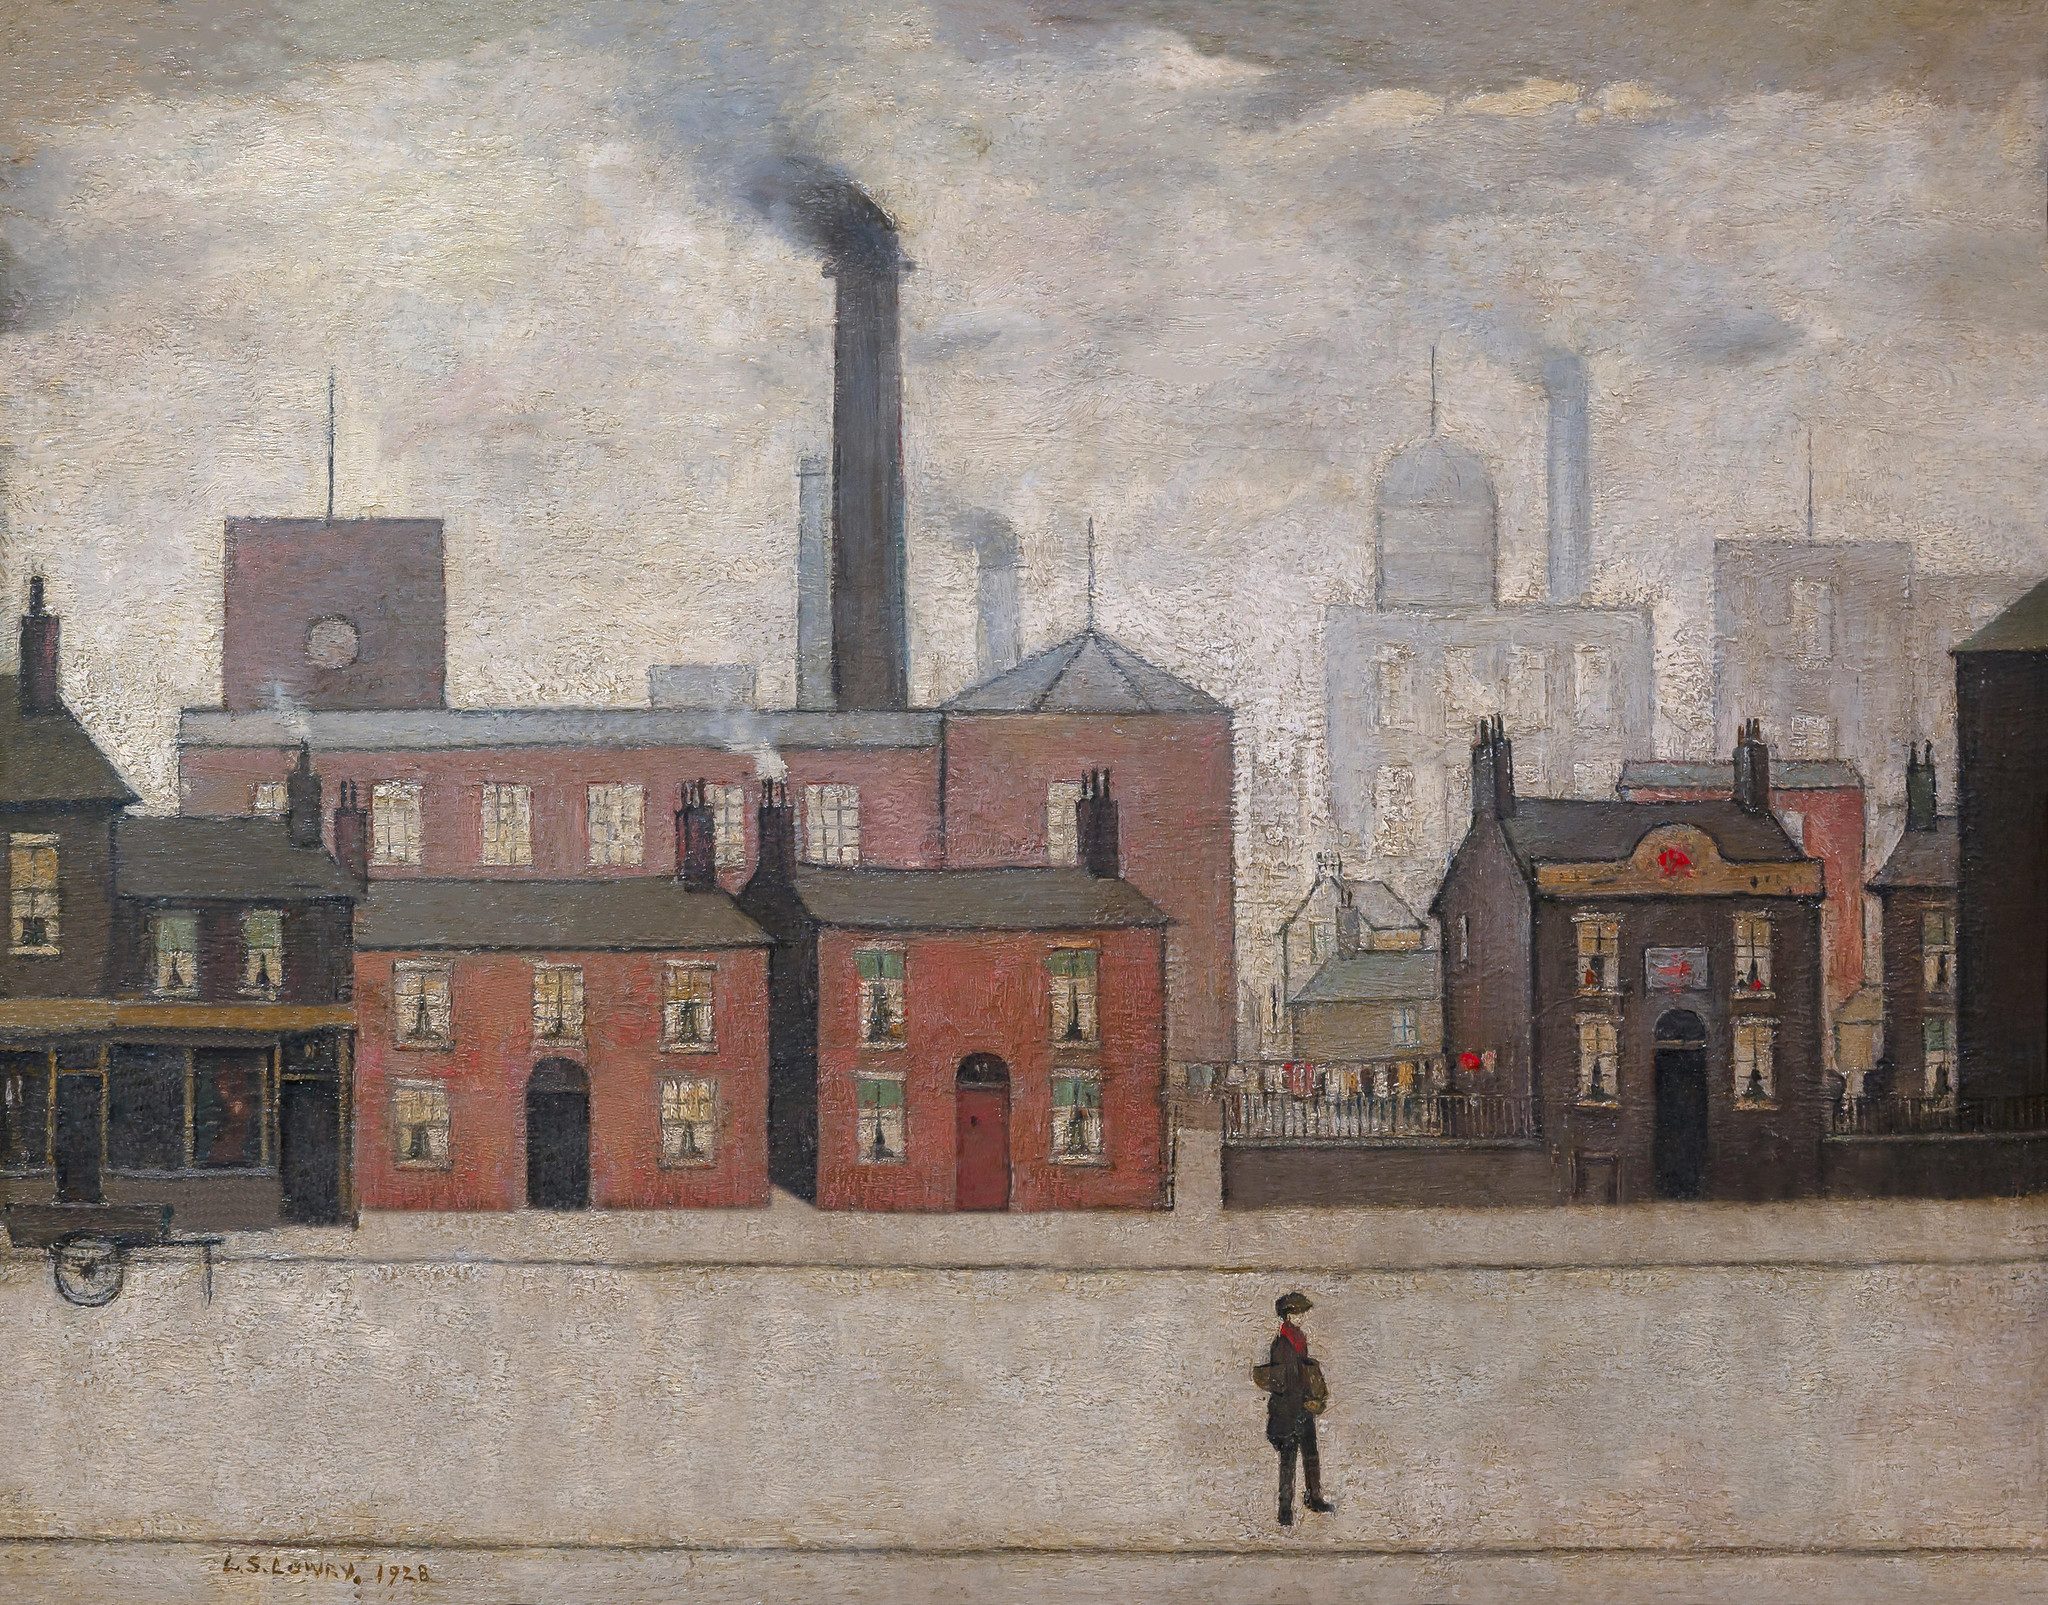 Digital artist Quentin Devine was commissioned by Samsung to take some of the issues concerning the Gen-Z audience to reimagine historical artworks as if they had been drawn today. Lowry’s acclaimed ‘Coming Home from the Mill’ (1928) is reconfigured to show a single worker reflecting the change in working patterns and again highlighting the issue of isolation.